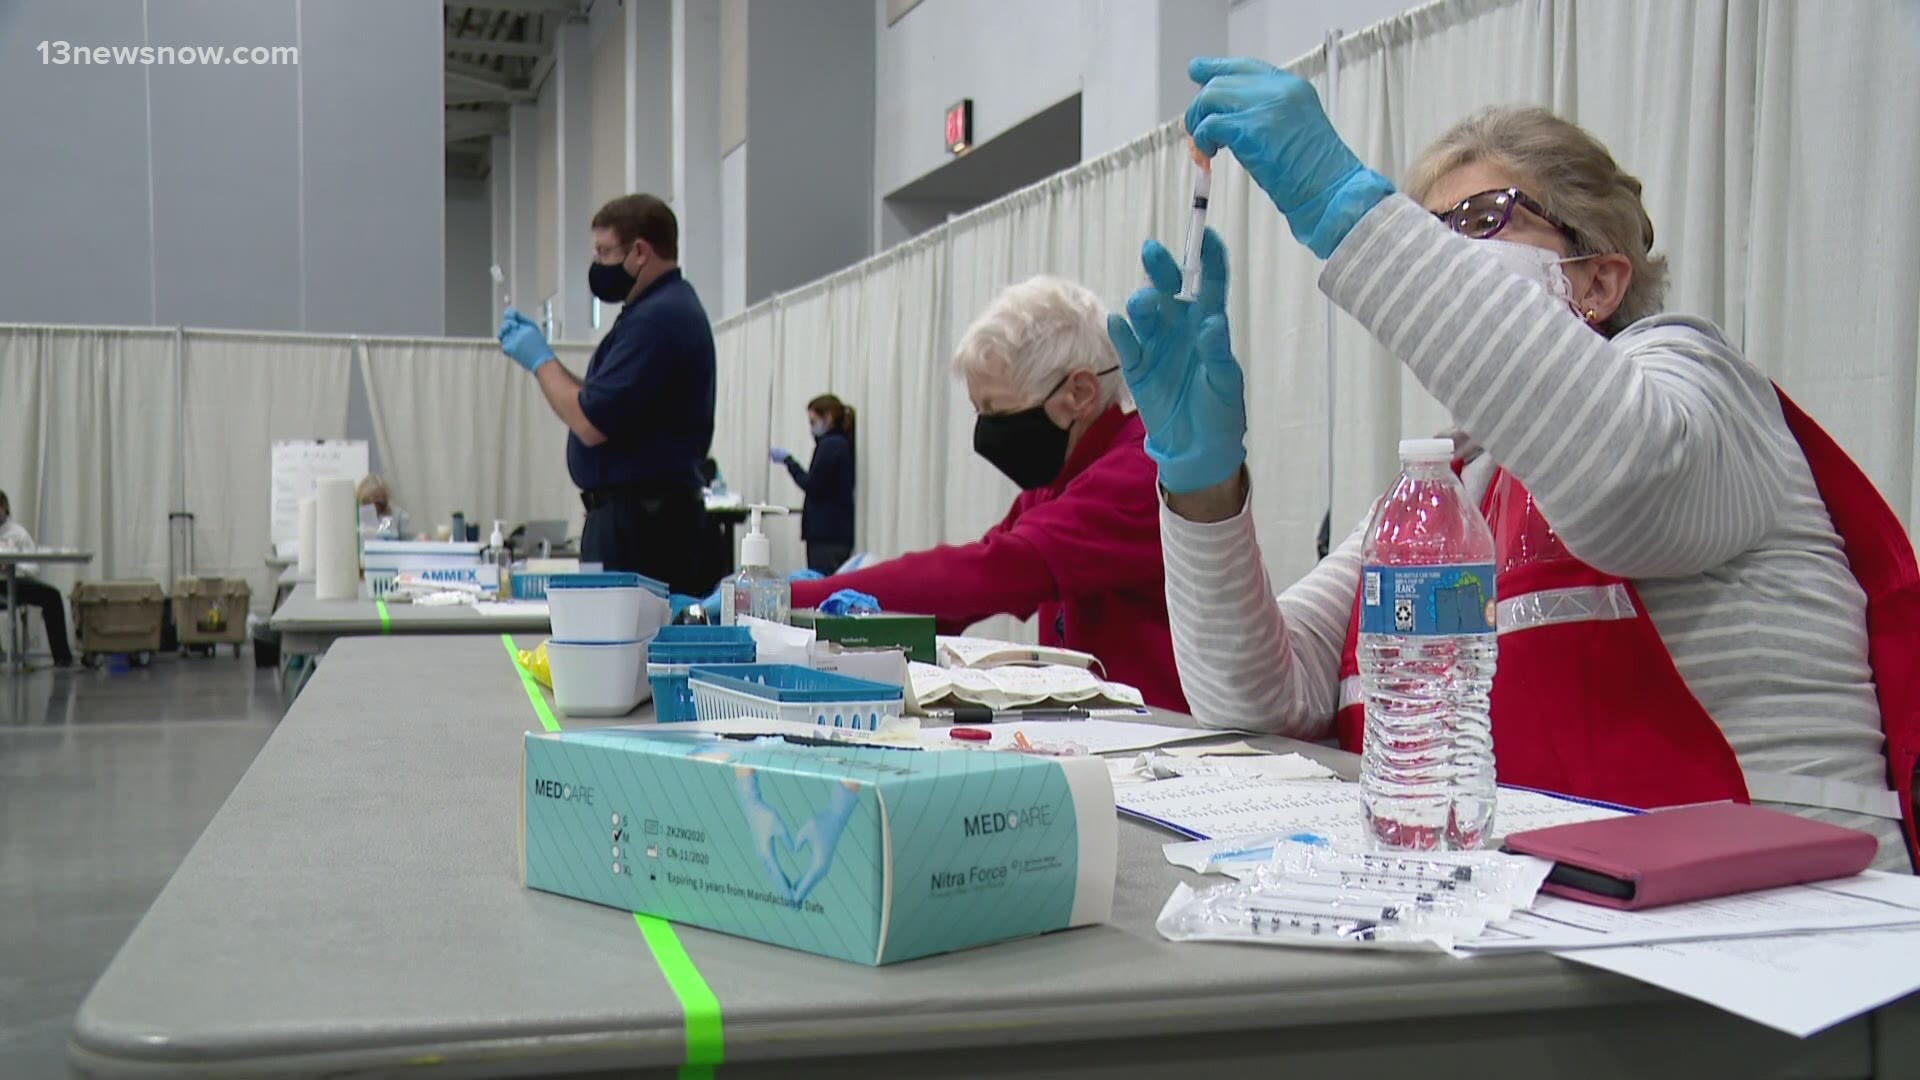 After winter storms delayed vaccine shipments, Virginia Beach borrowed 2,000 doses from Sentara Healthcare to fulfill its scheduled vaccination appointments Monday.